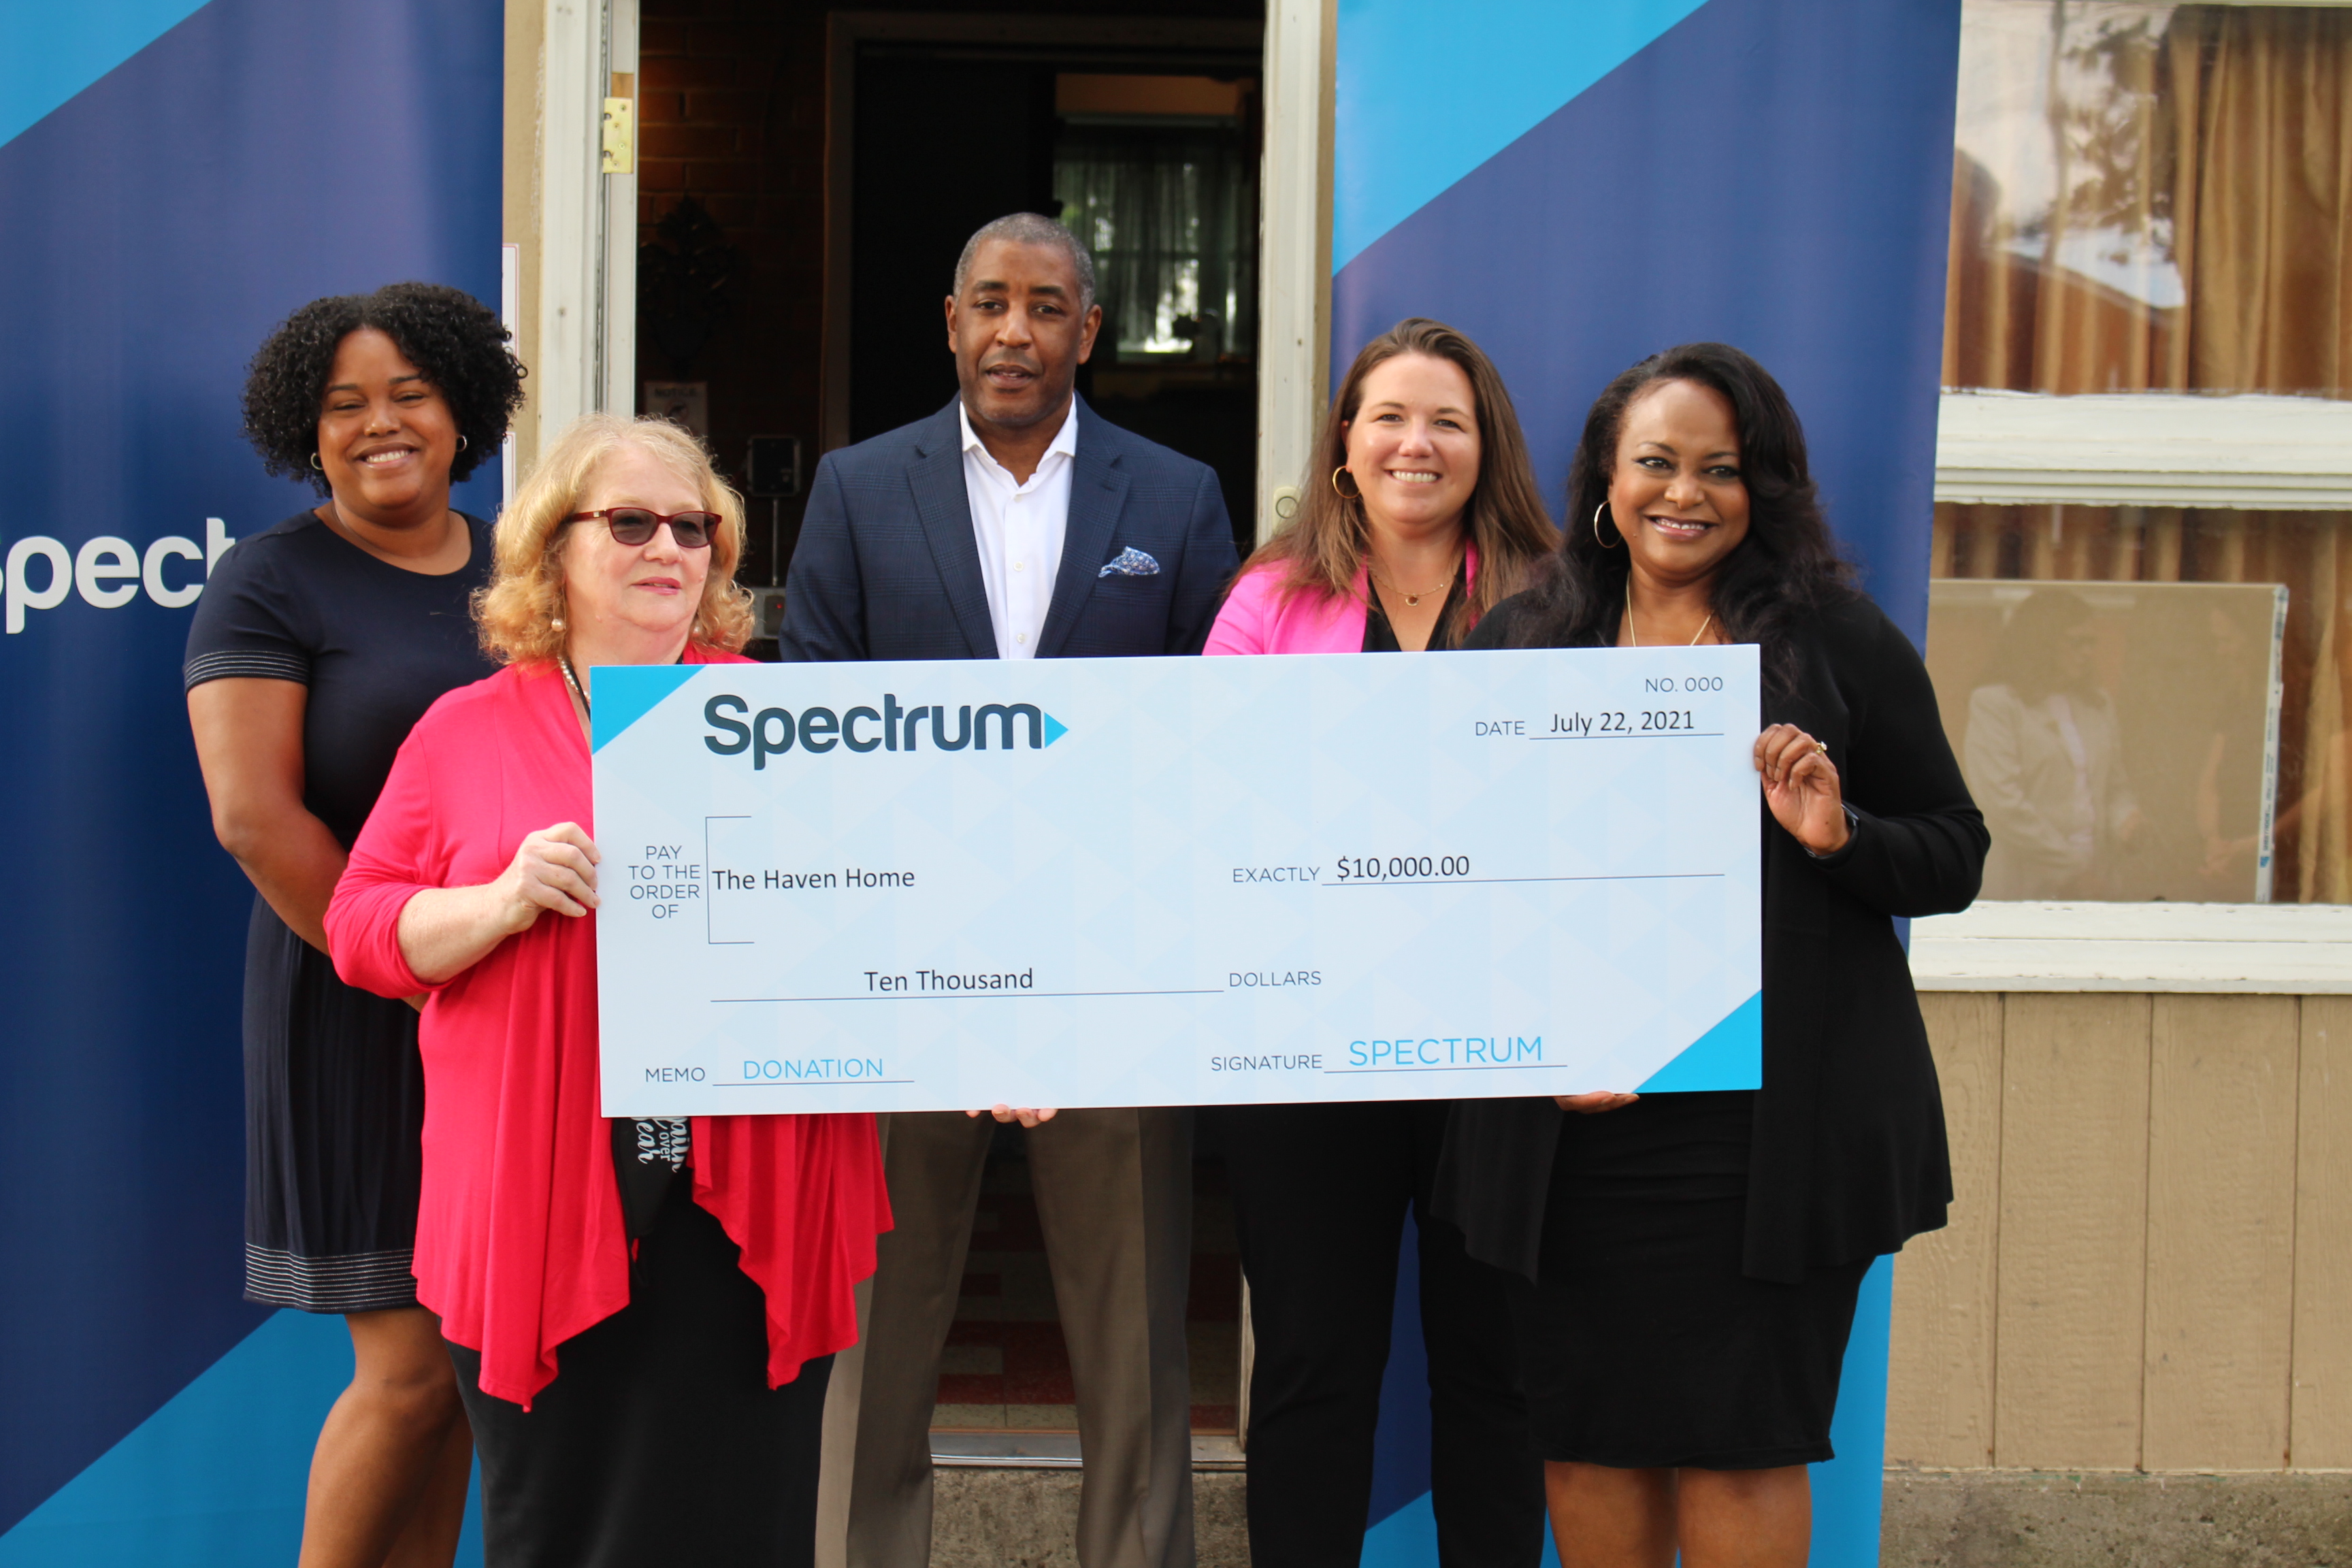 Charter Communications gives $500,000 to local charities (spectrumnews1.com)